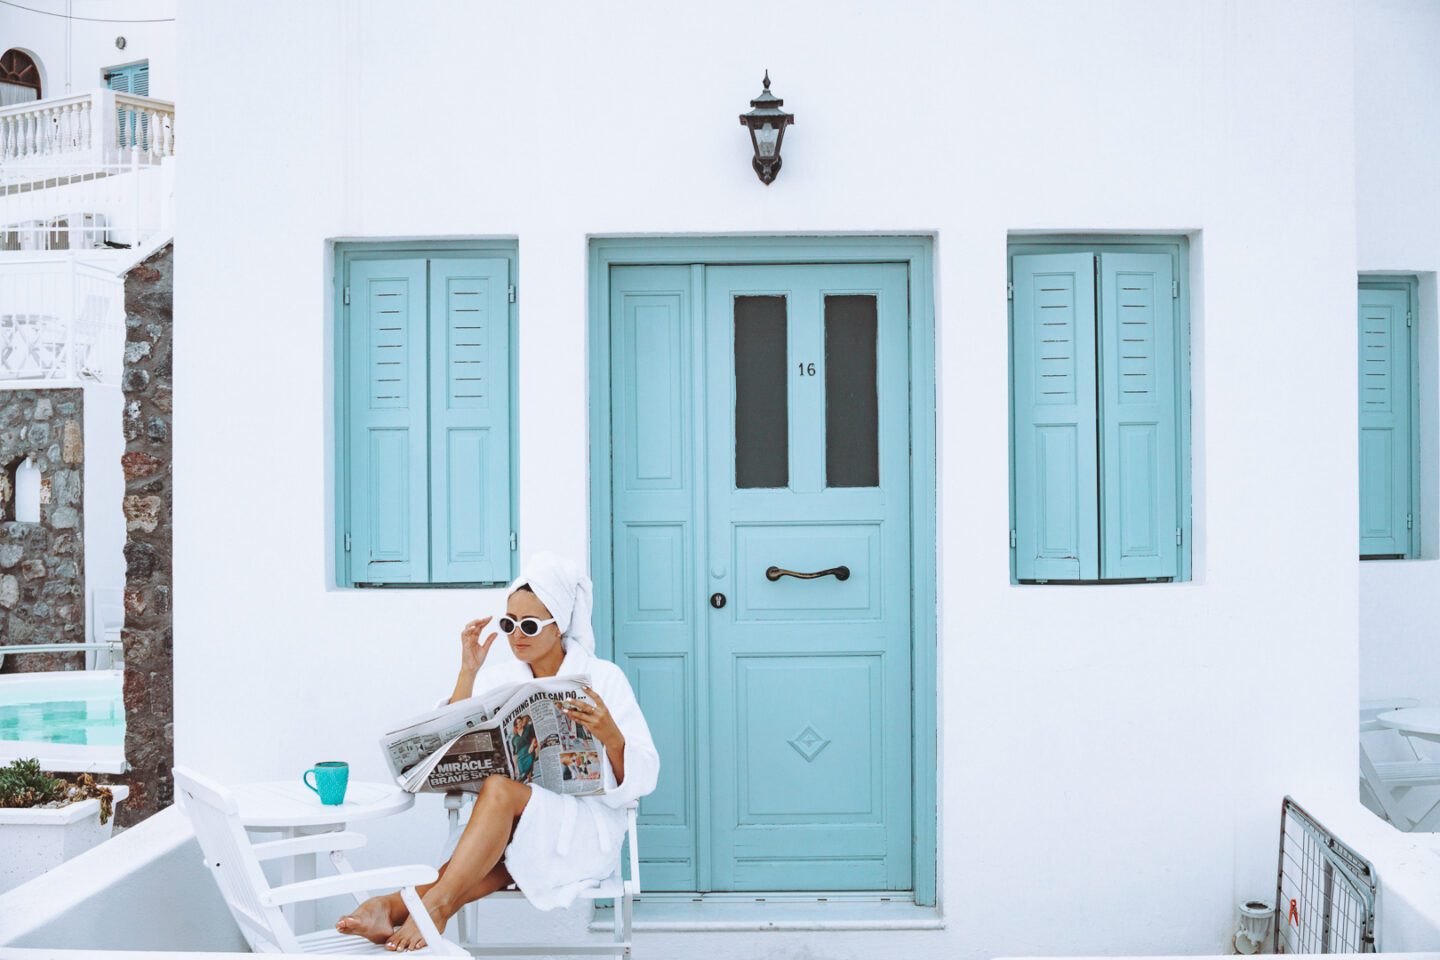 A girl reads the newspaper and enjoys a cup of coffee on her Greek patio in Santorini wearing a white bathrobe, sunglasses and a towel in her hair